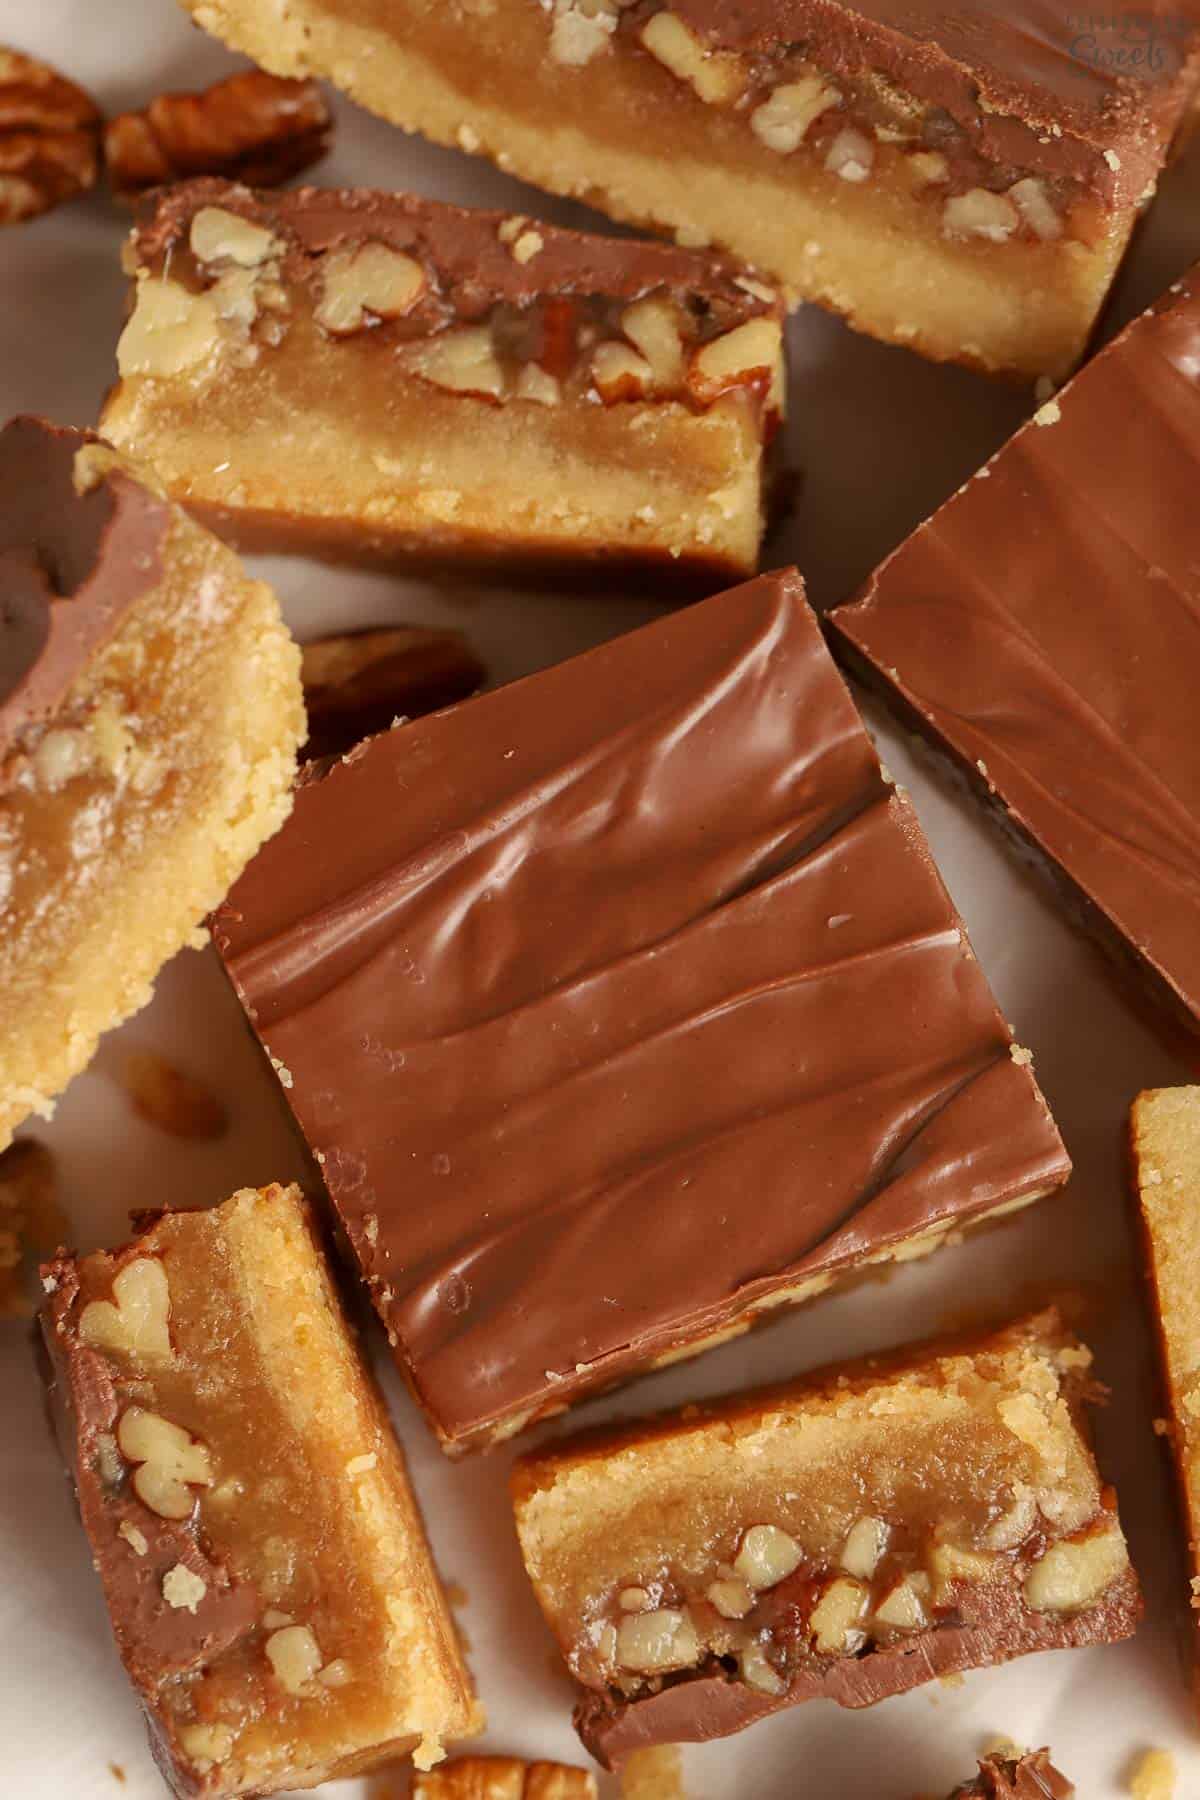 Chocolate caramel pecan bars on parchment paper.